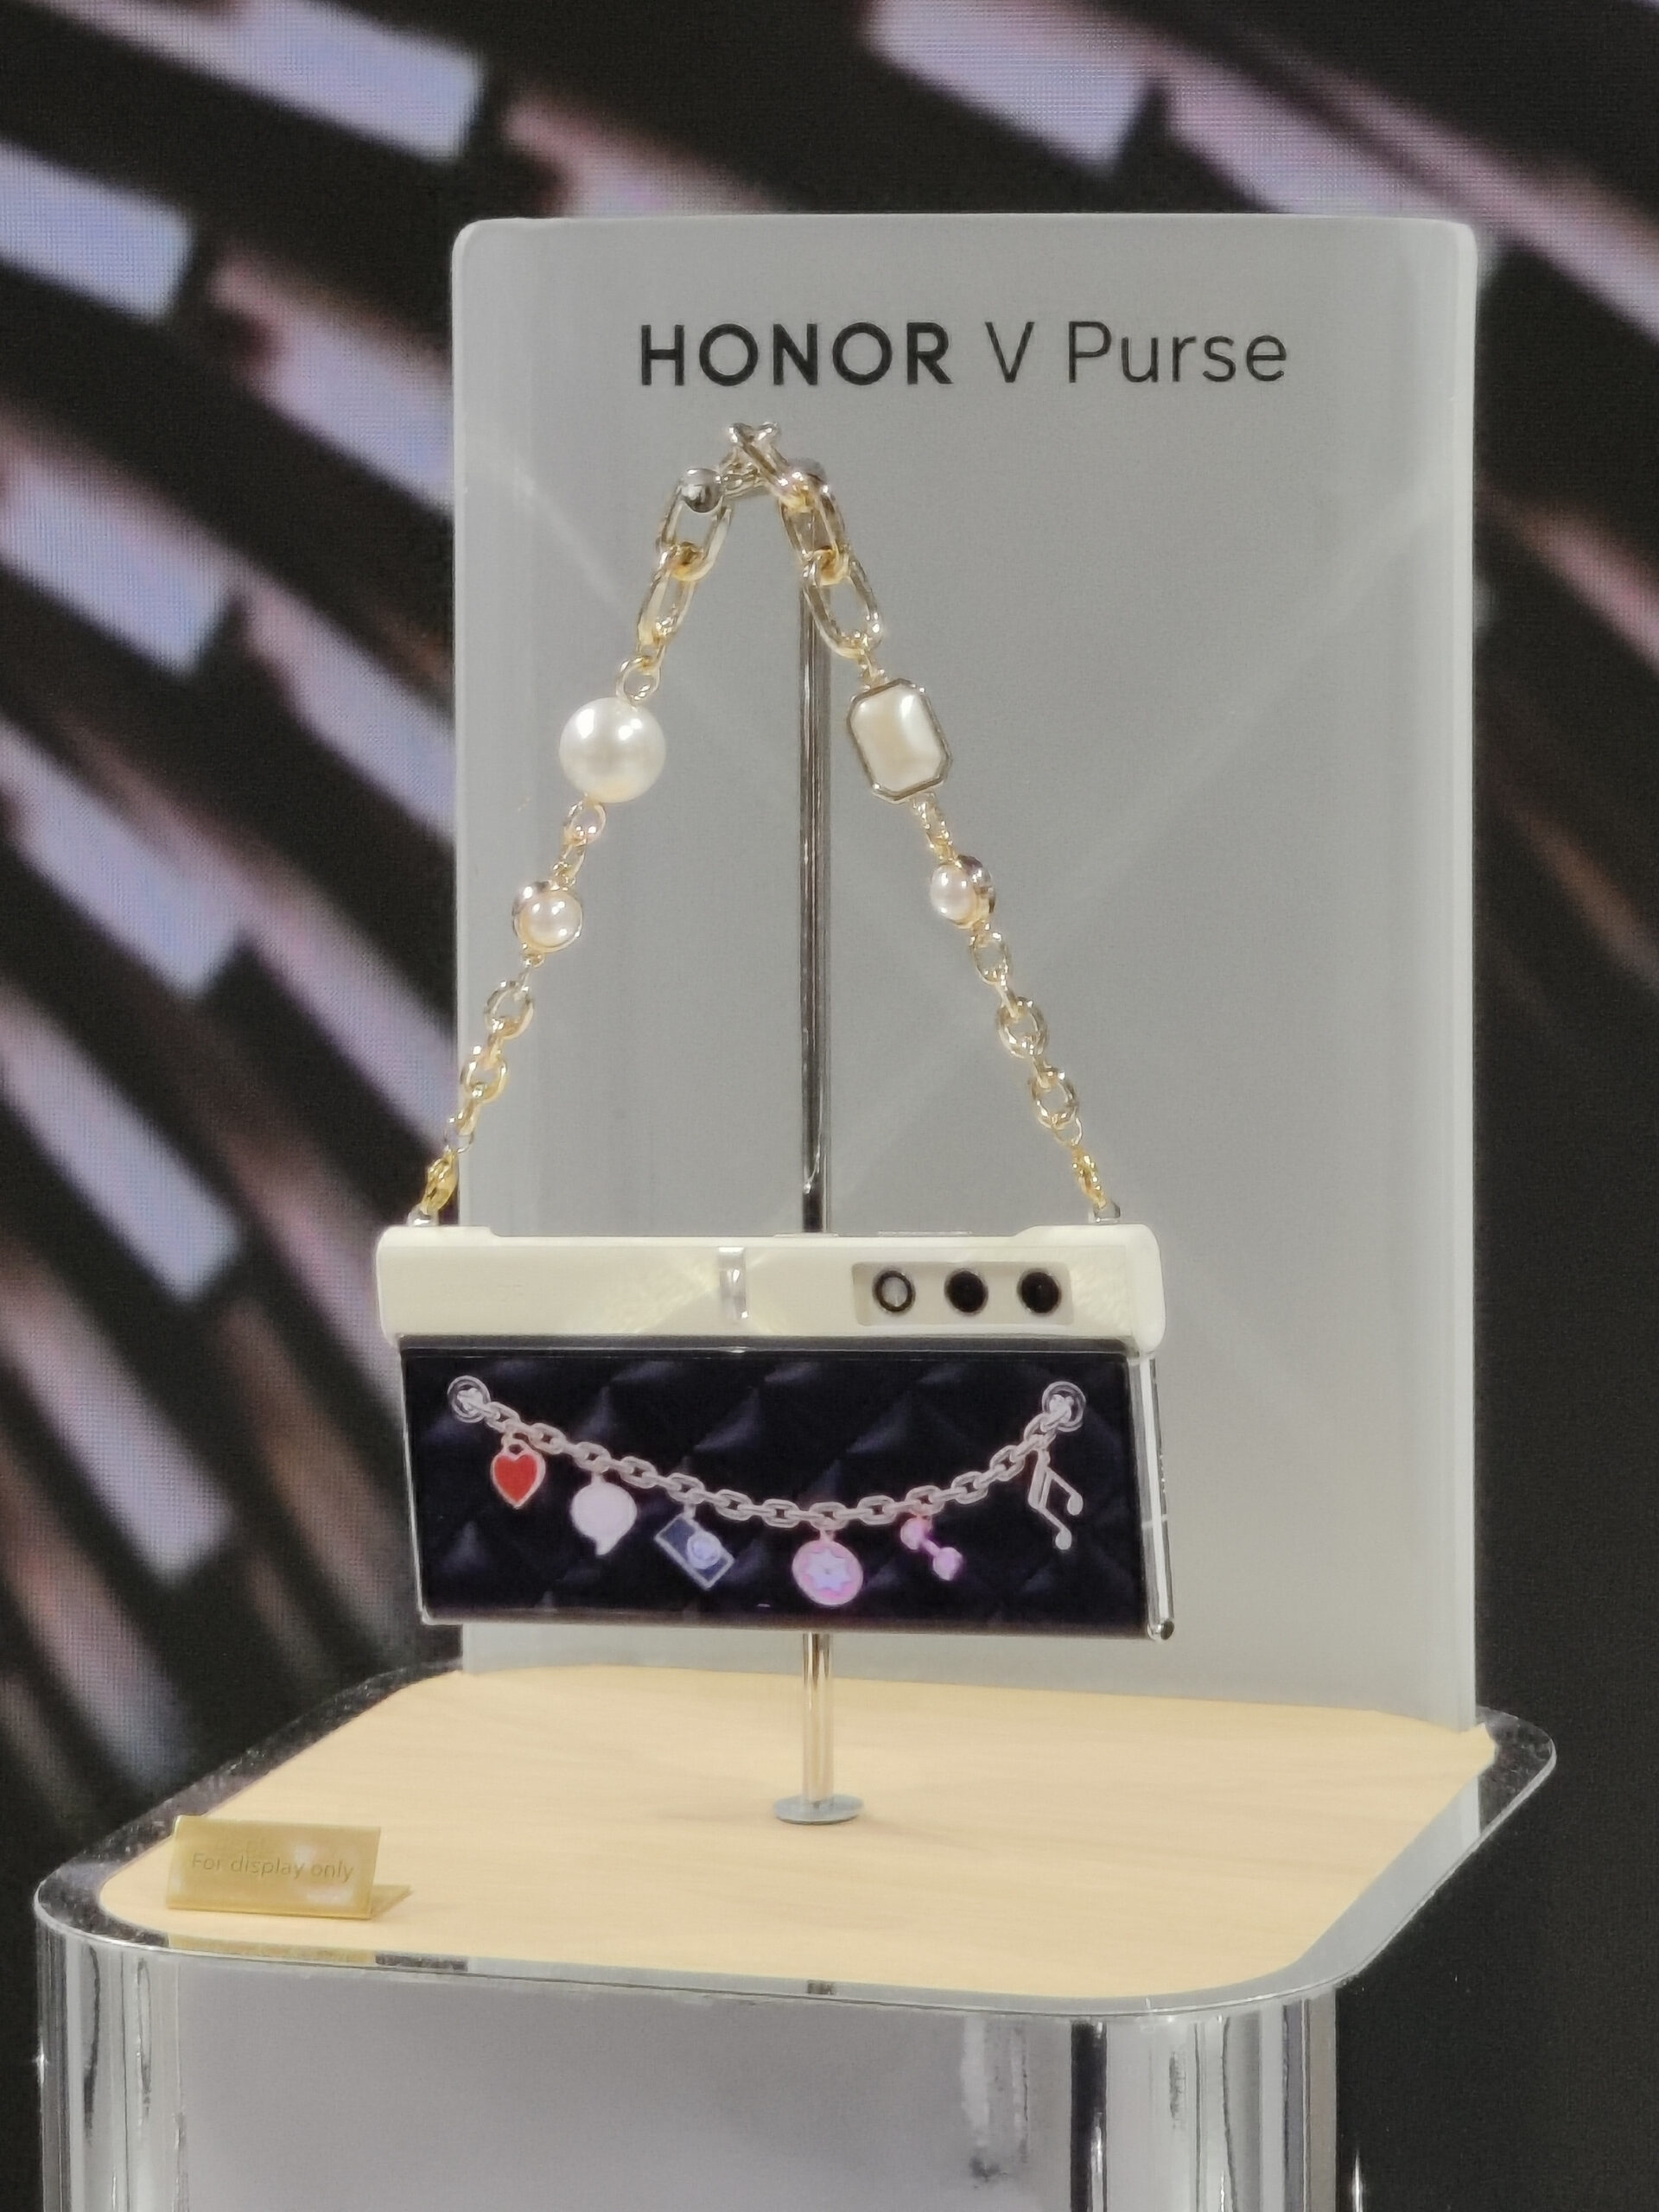 Phone or bag? Honor V Purse folding smartphone is both. It may be